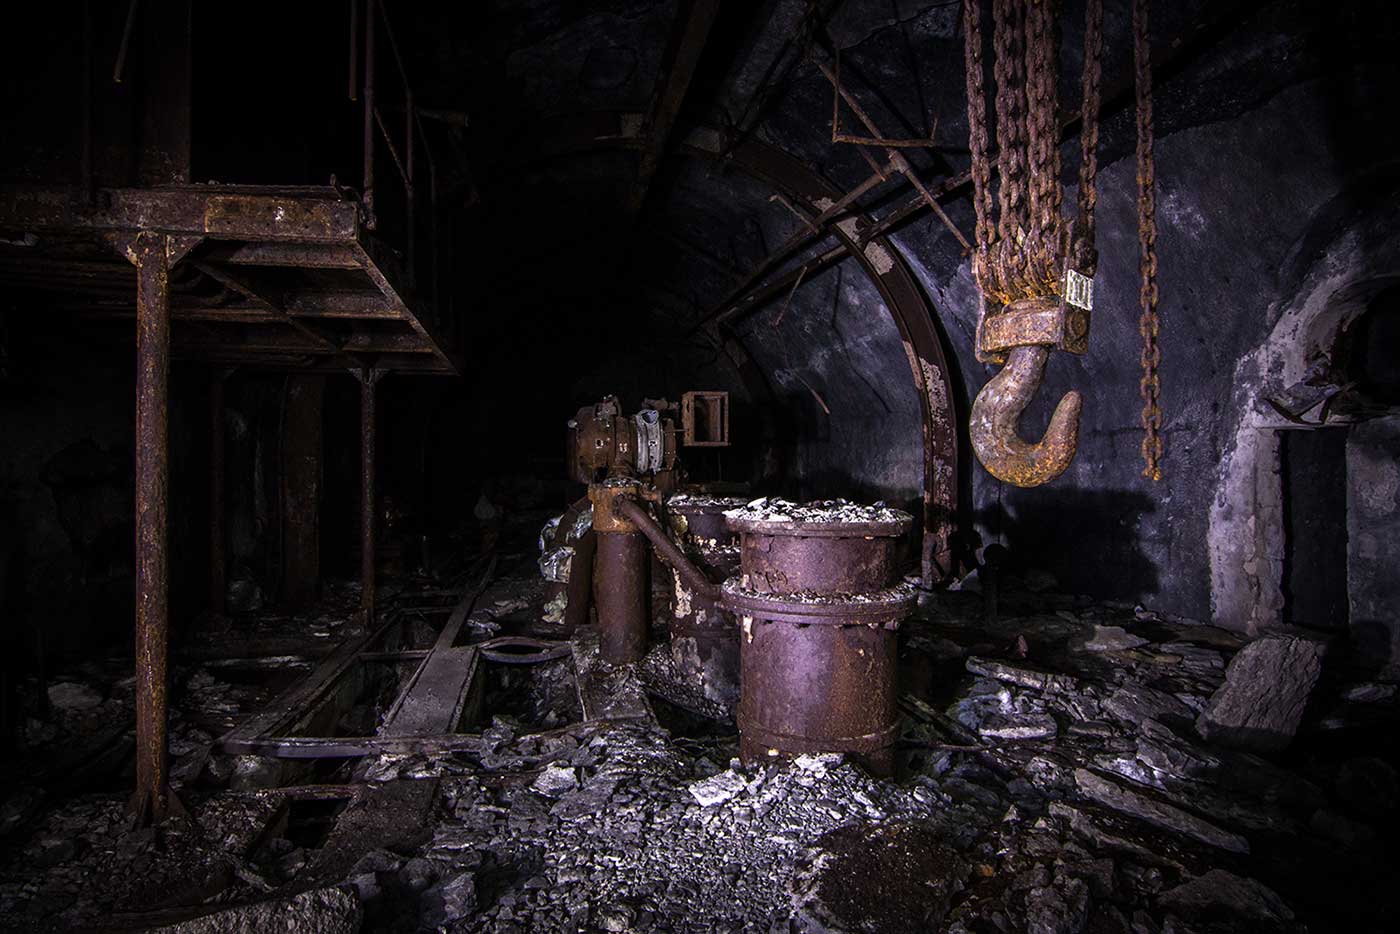 While the main galleries of the Željava Airbase have mostly been stripped bare, smaller side passages lead deeper into the mountain, to spaces that still contain rusted machinery and other original features.